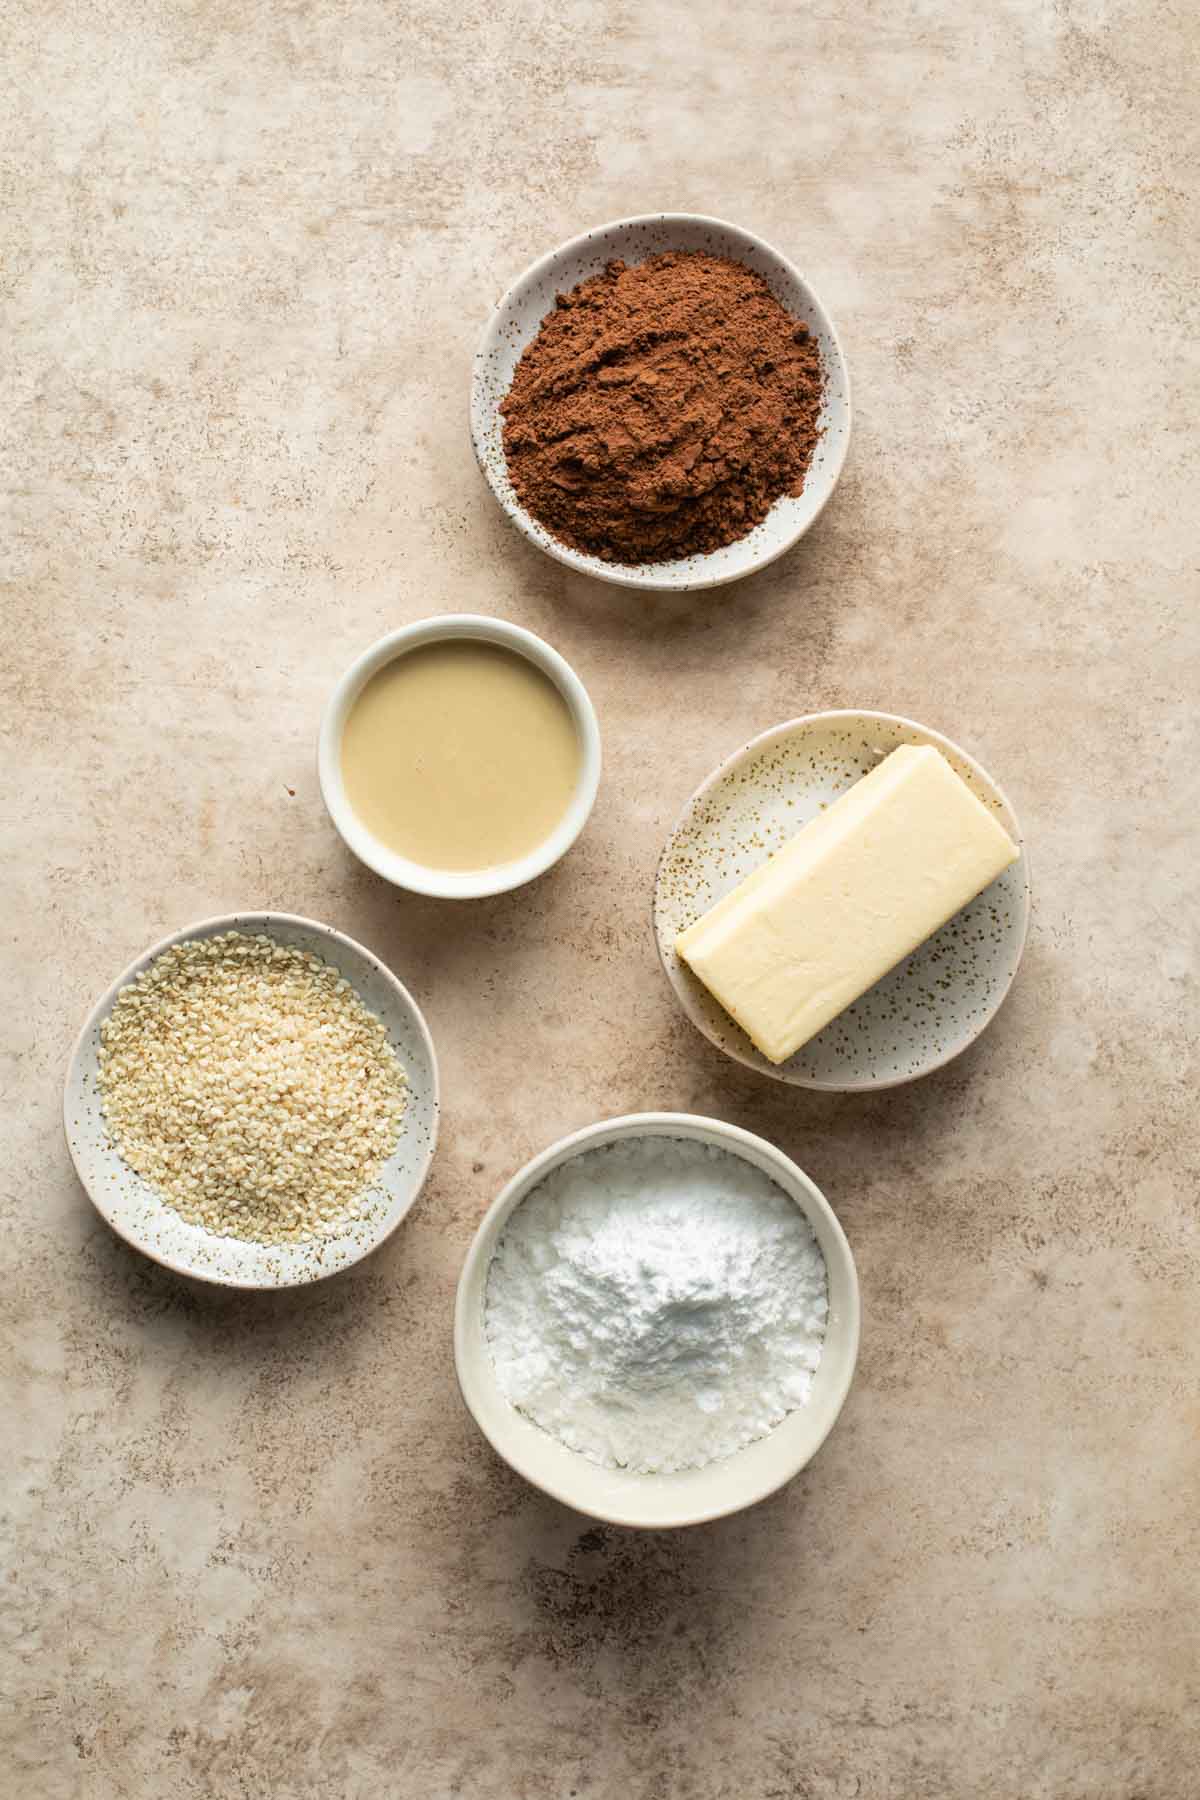 Ingredients for chocolate tahini frosting.